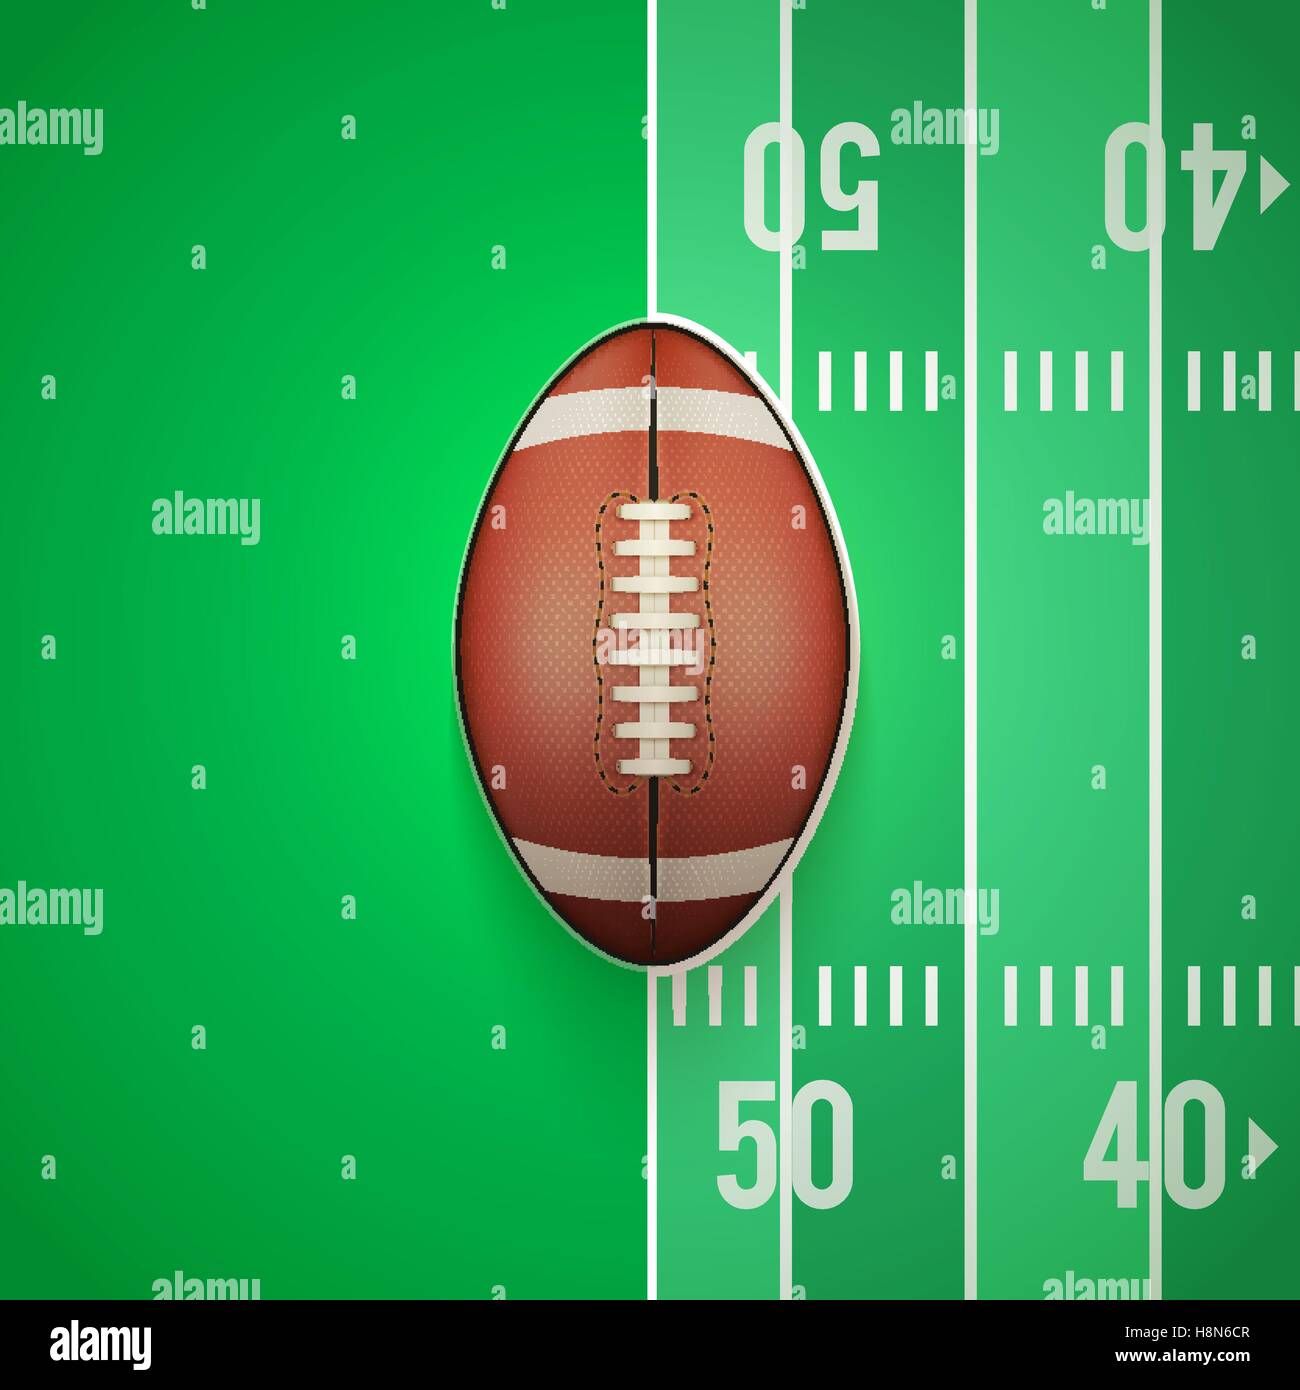 440+ Poster Template Of Football Field And Ball Stock